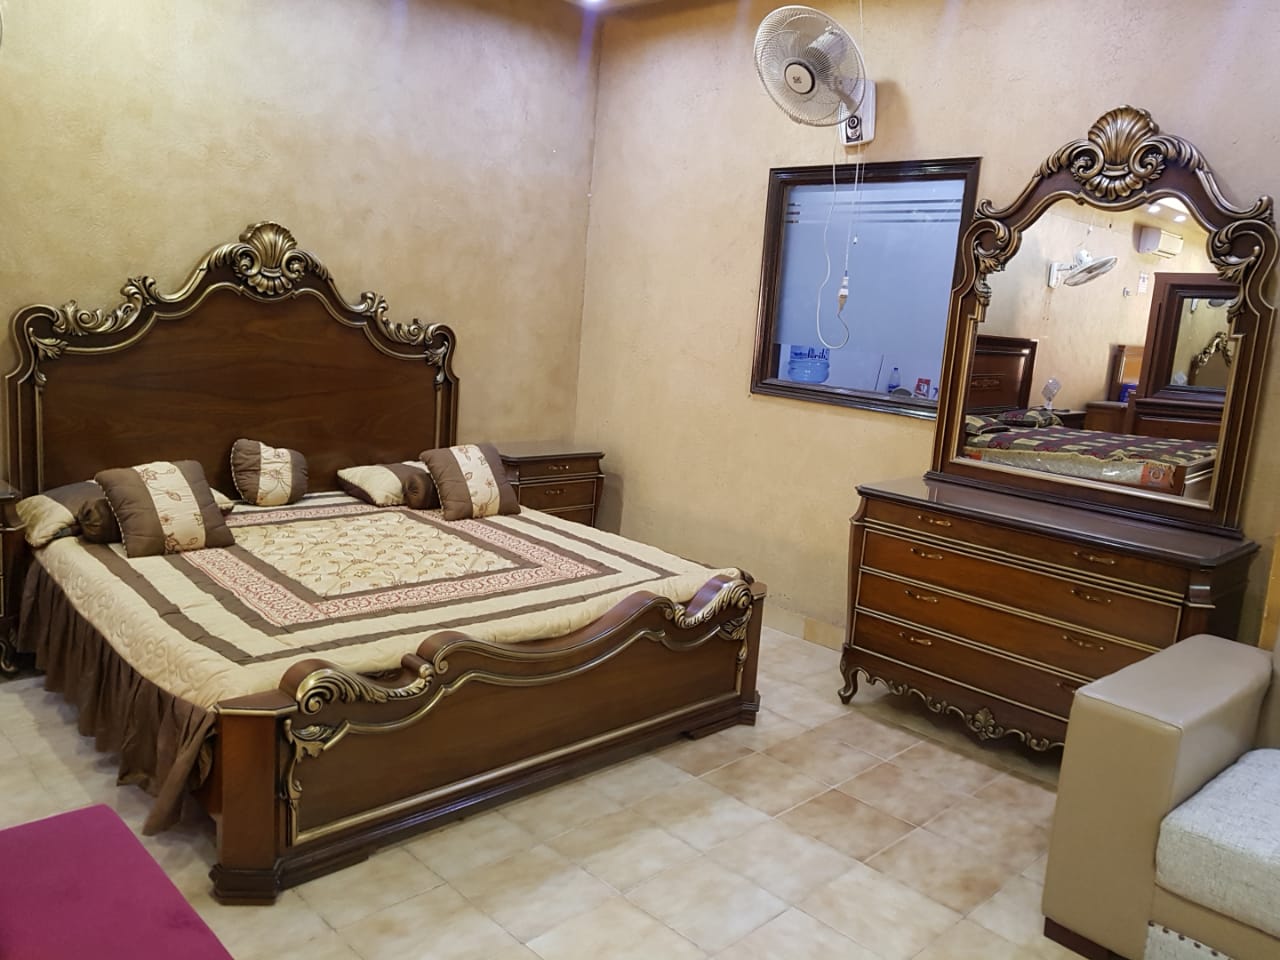 Bridal Bedroom Set With Affordable Price In Karachi Pakistan